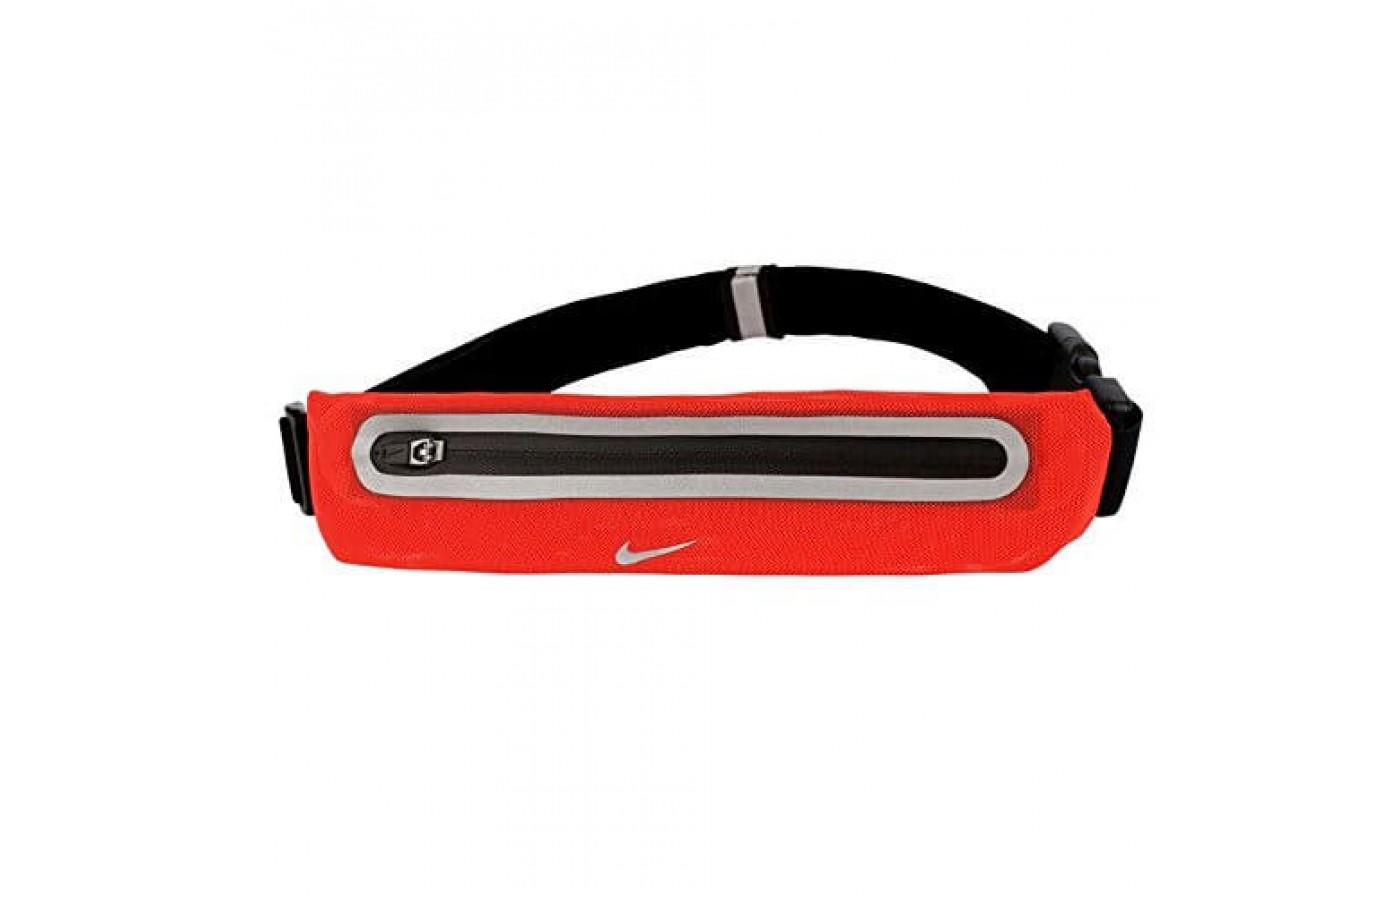 The Nike Lean Waist Pack is made of stretchy fabric